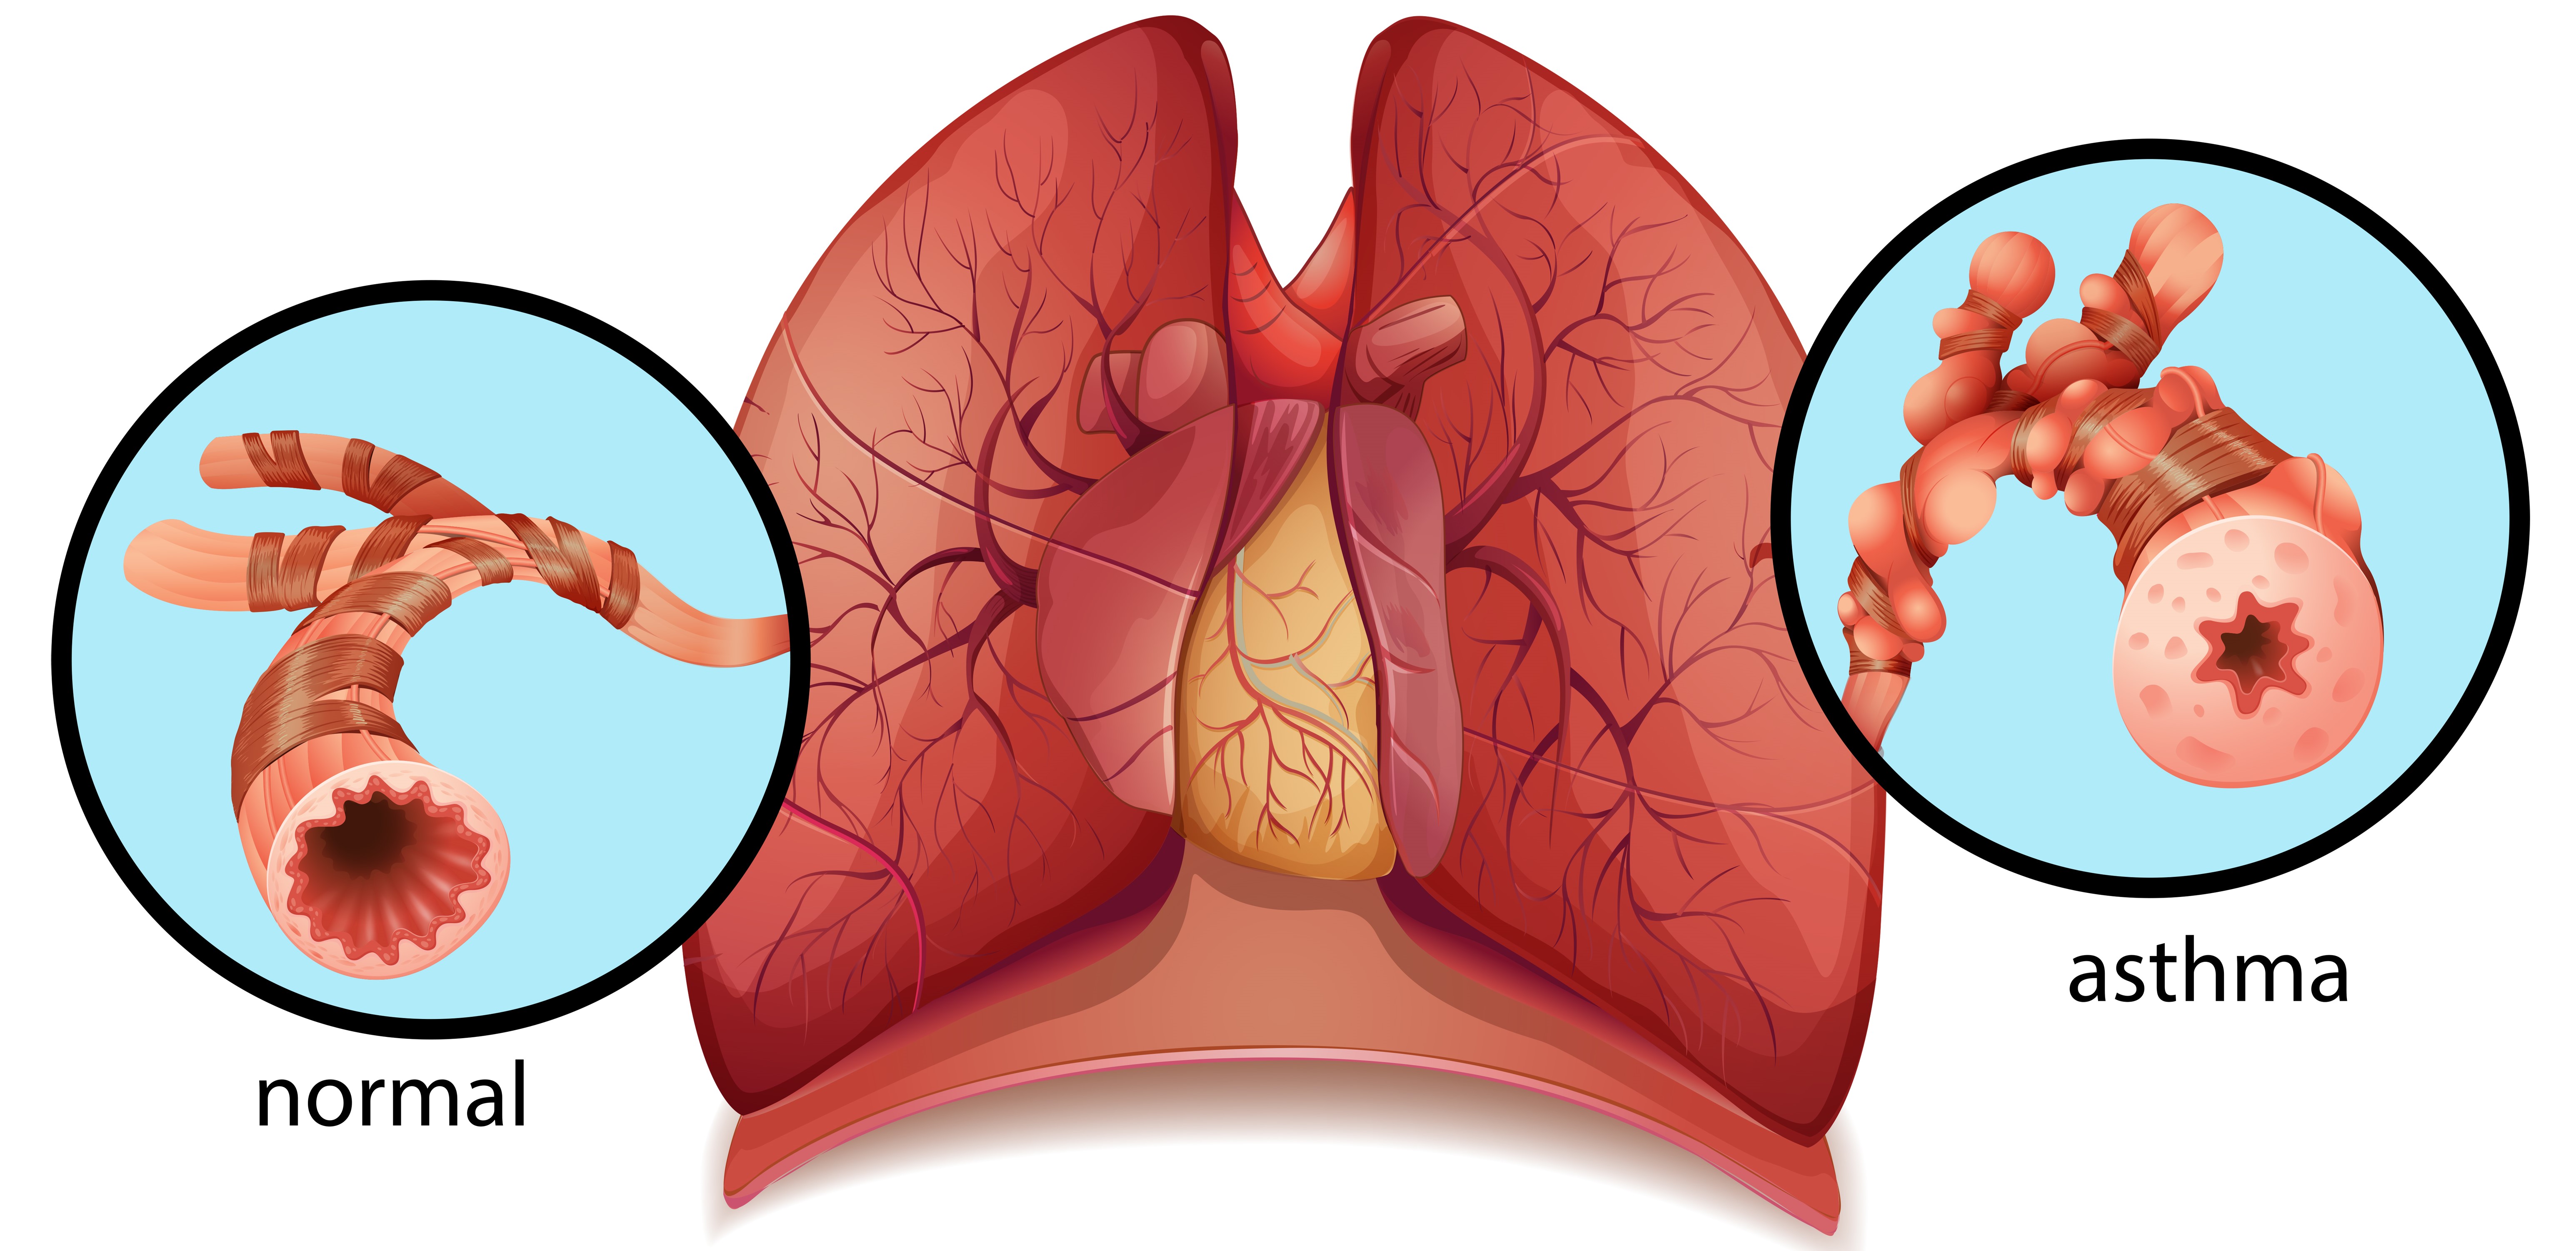 graphic of human lungs comparing airways of non ashma and ashma patient arnot health